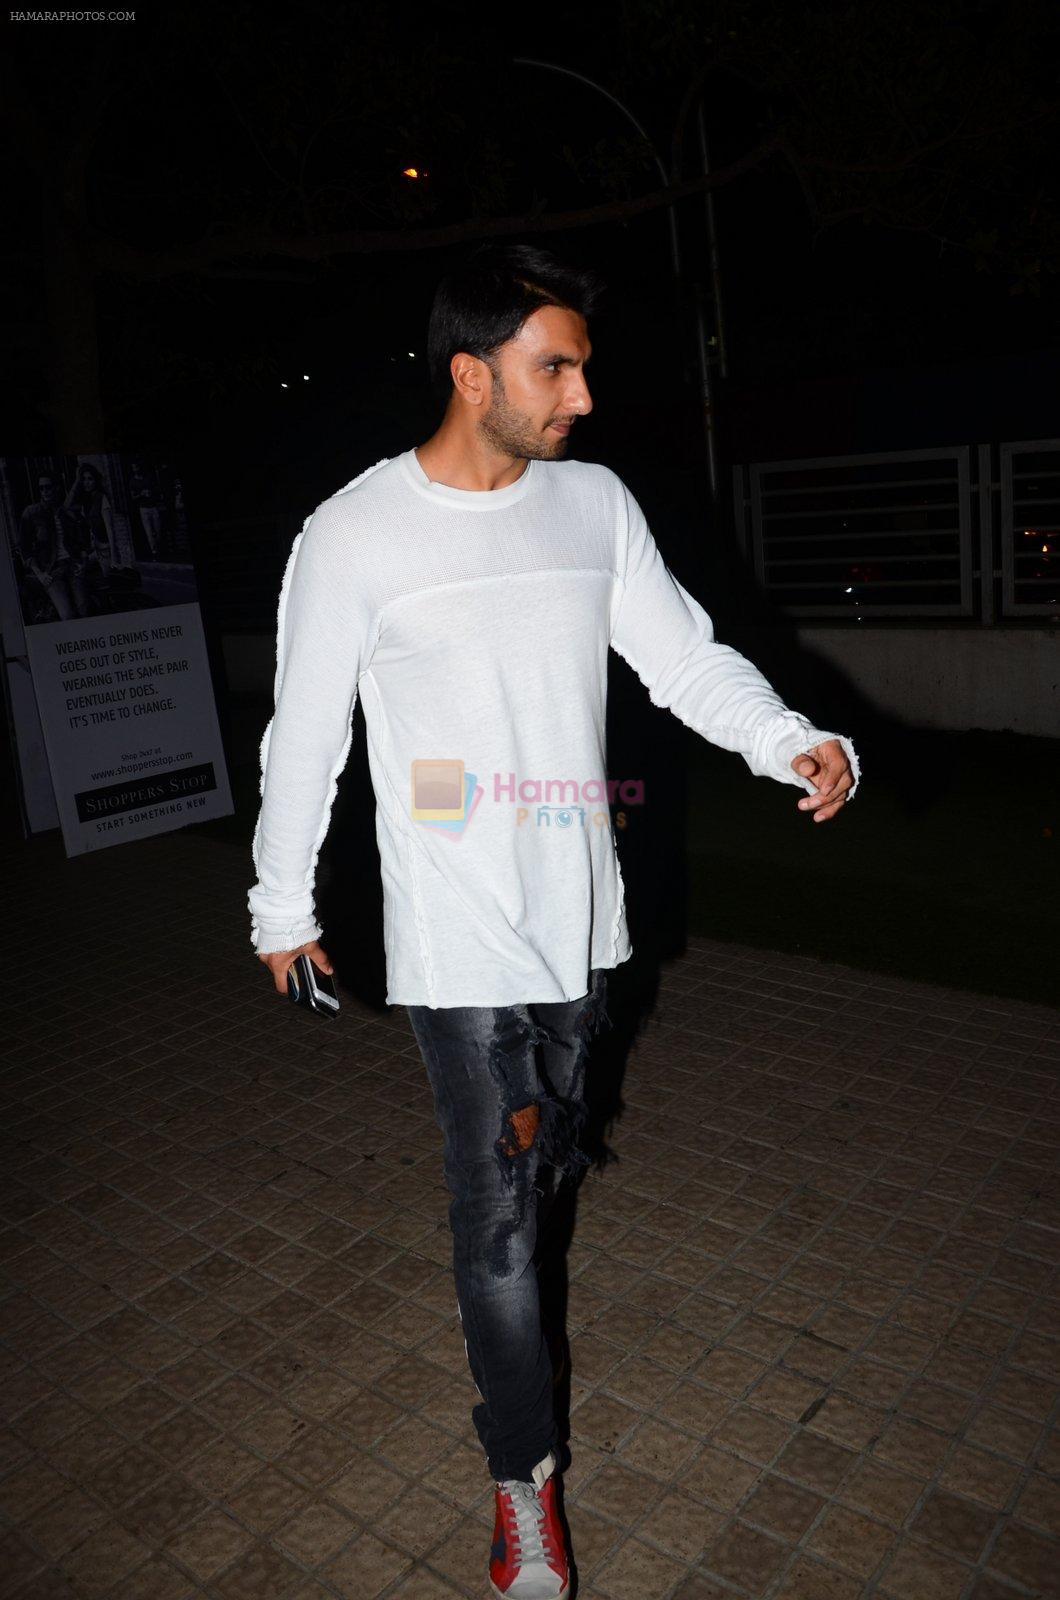 Ranveer Singh snapped at PVR on 4th March 2016